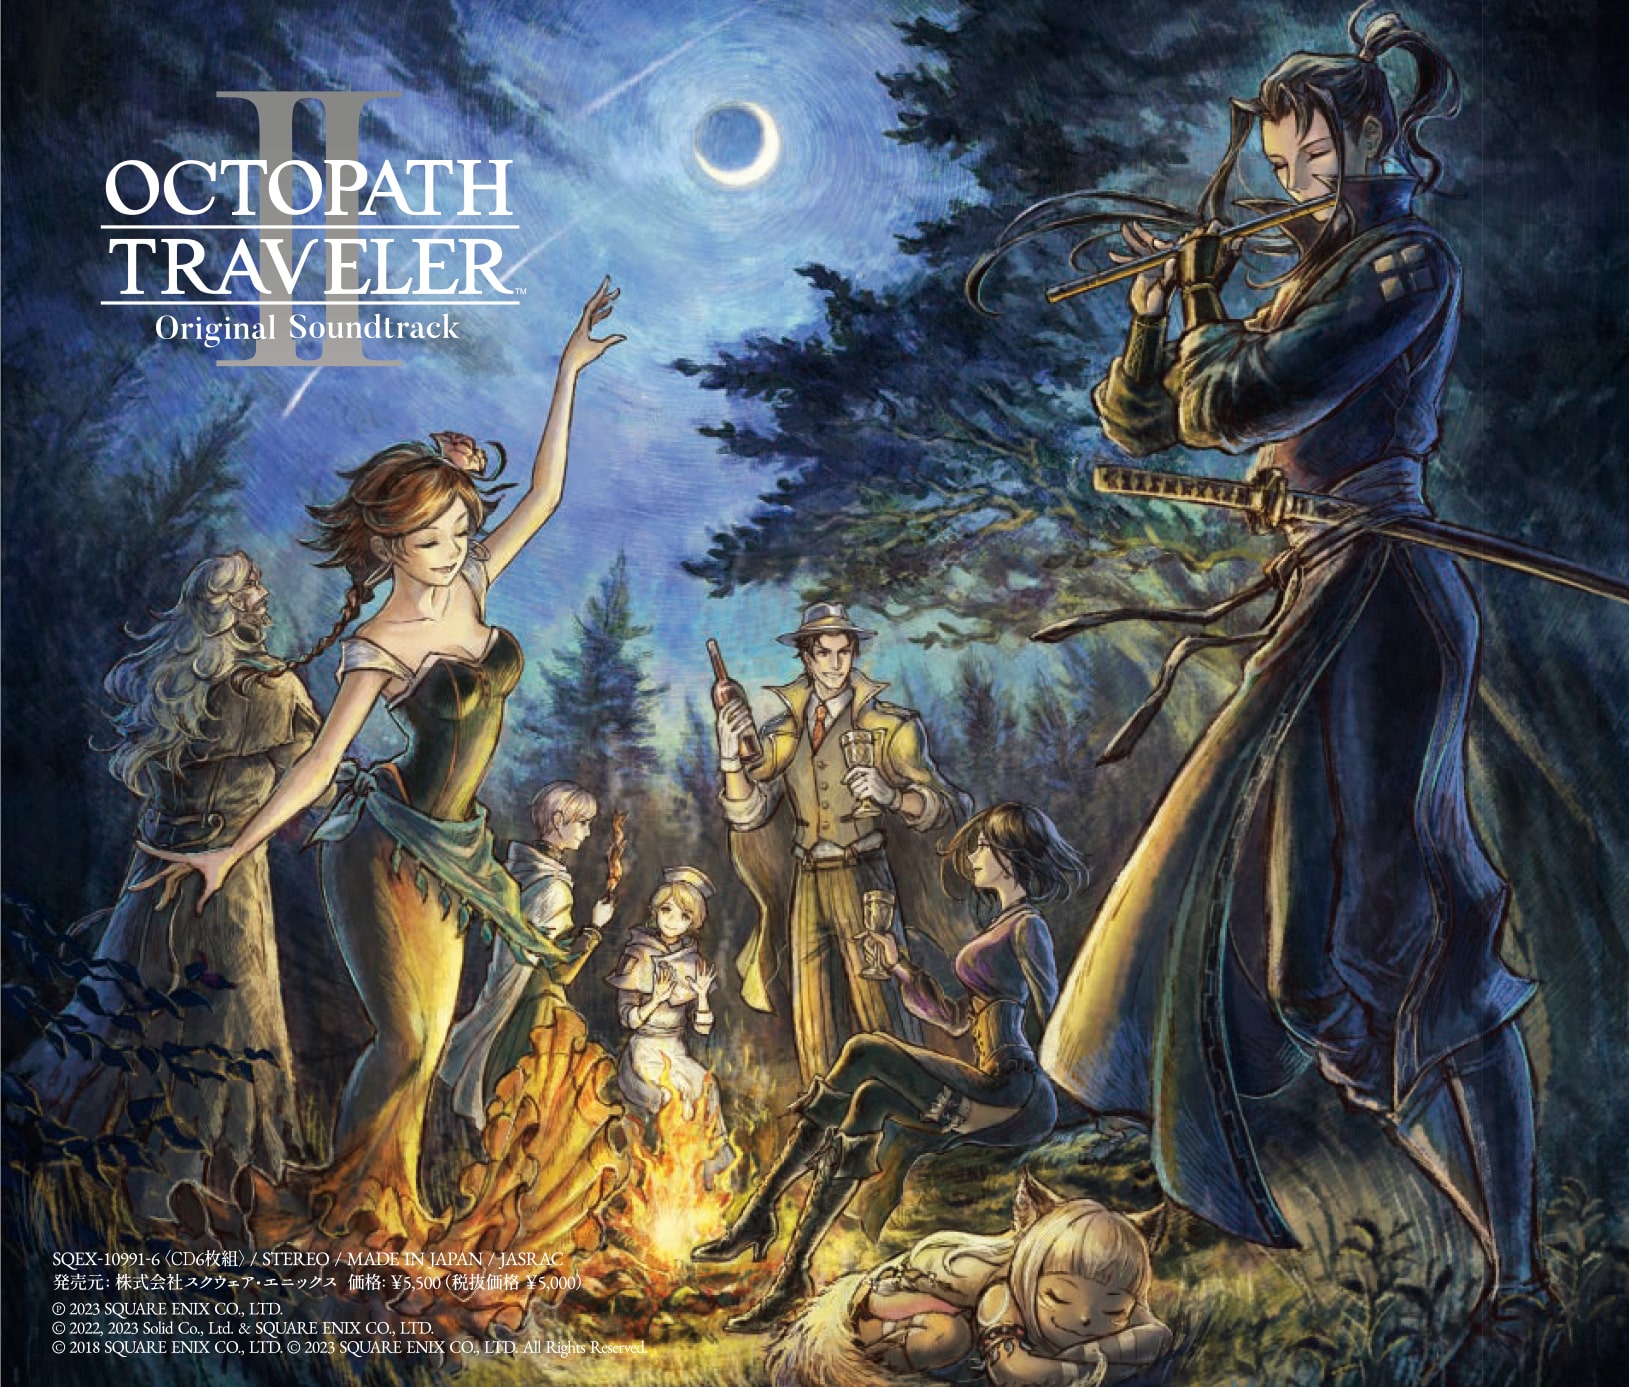 Octopath Traveler II Soundtrack Available For Pre-Order; 6 CDs